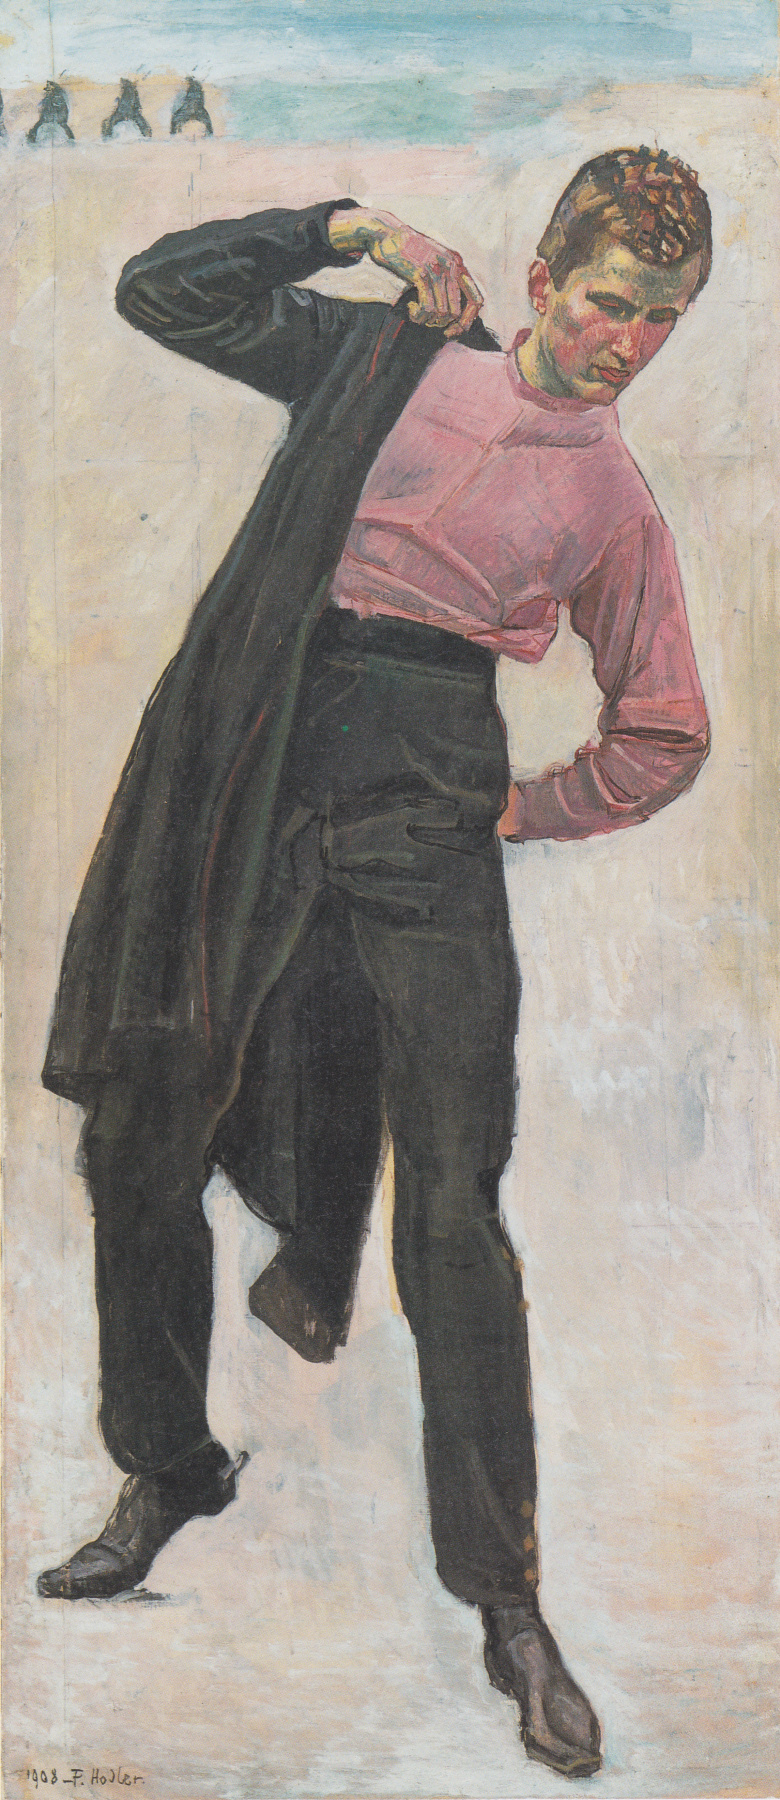 Ferdinand Hodler. The young freedom fighter